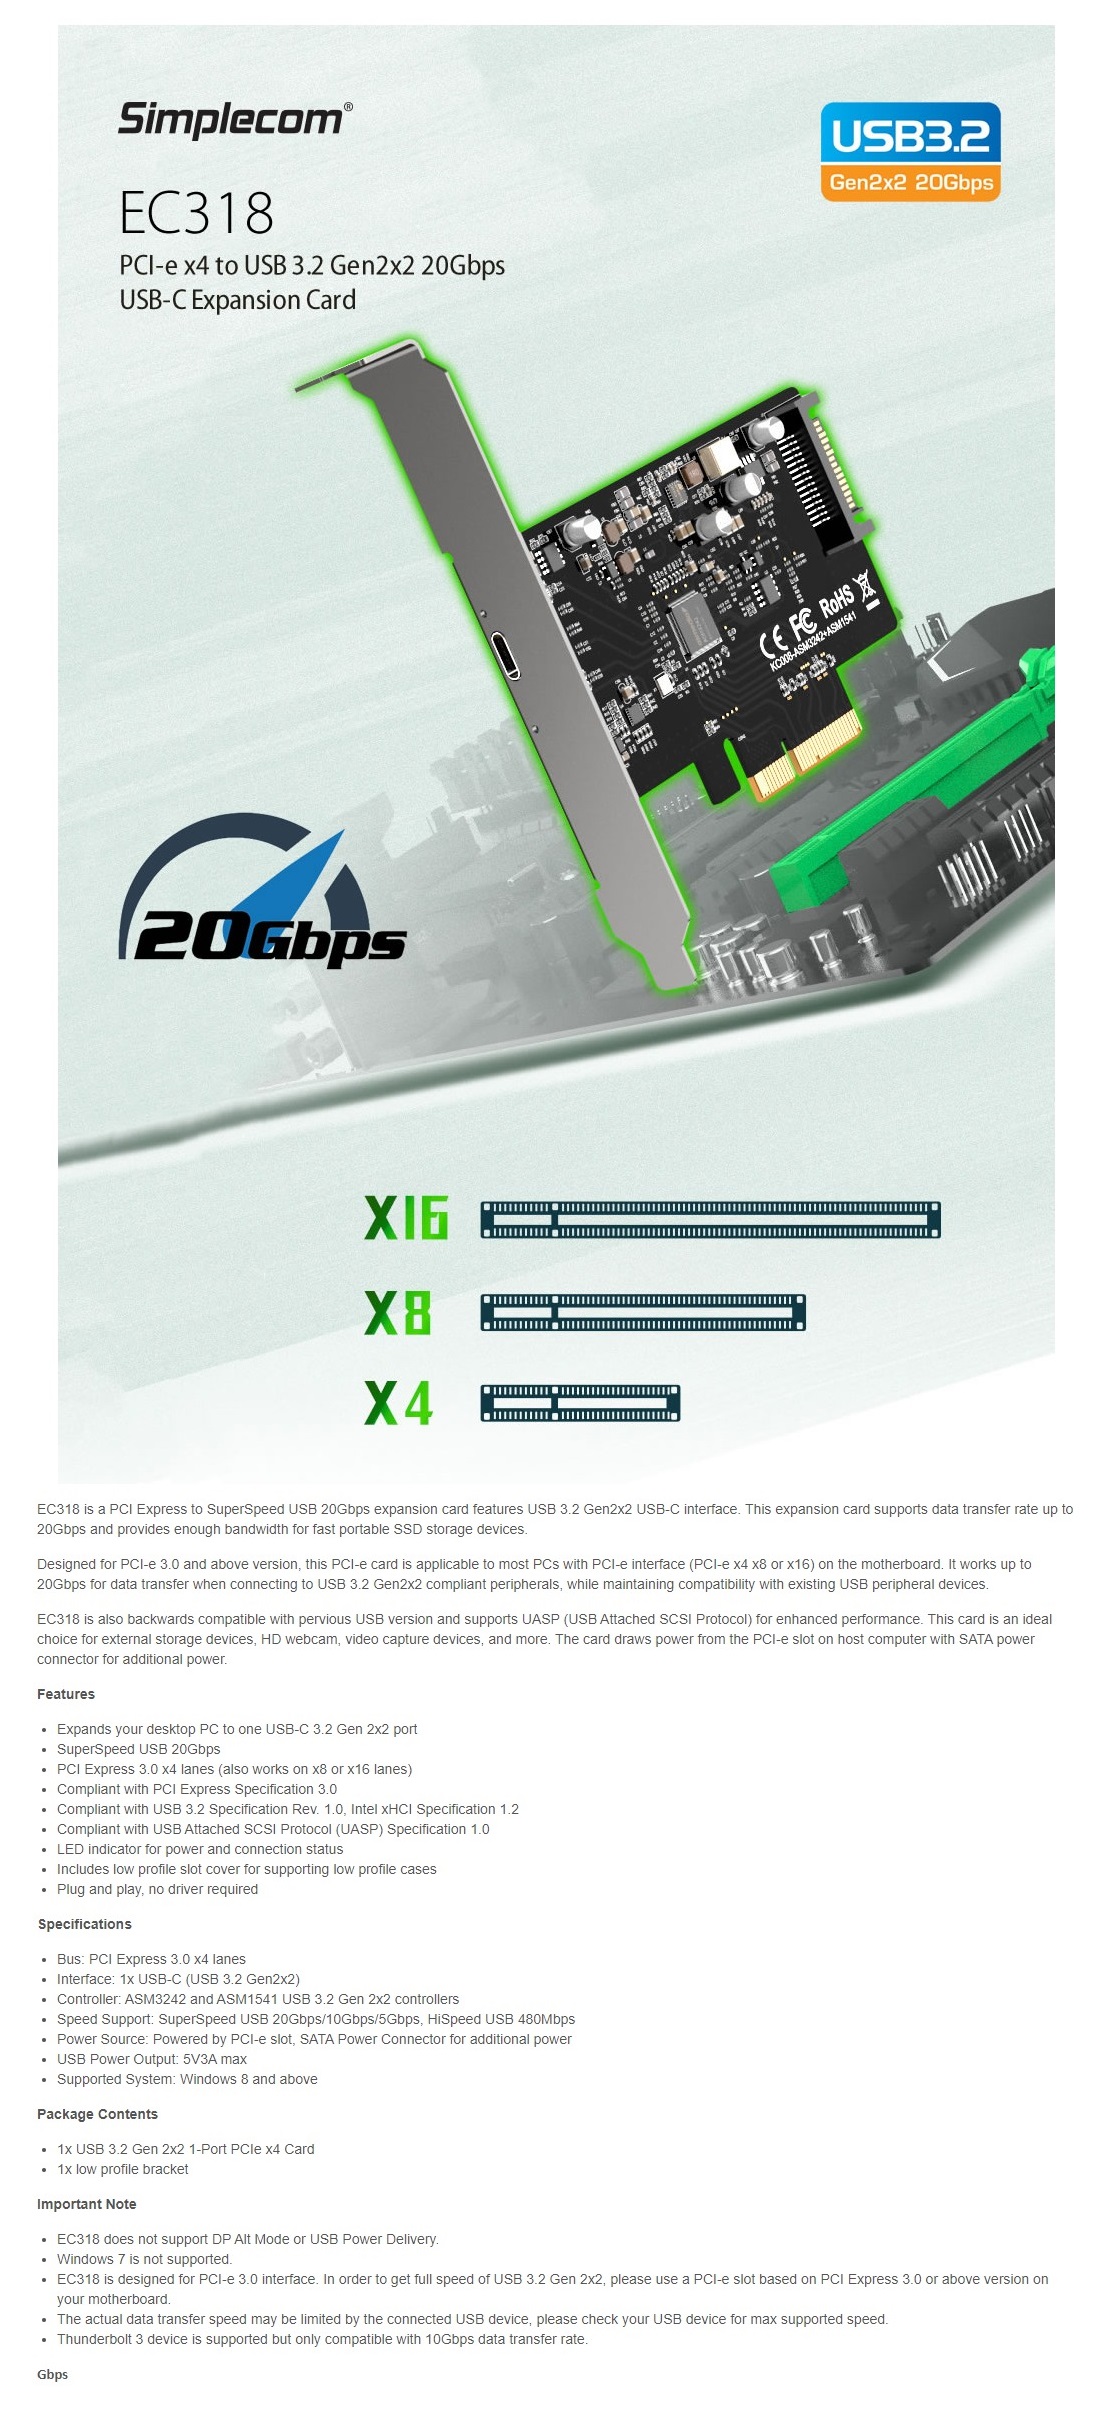 A large marketing image providing additional information about the product Simplecom EC318 PCIe x4 to USB-C 3.2 Gen2x2 Expansion Card - Additional alt info not provided